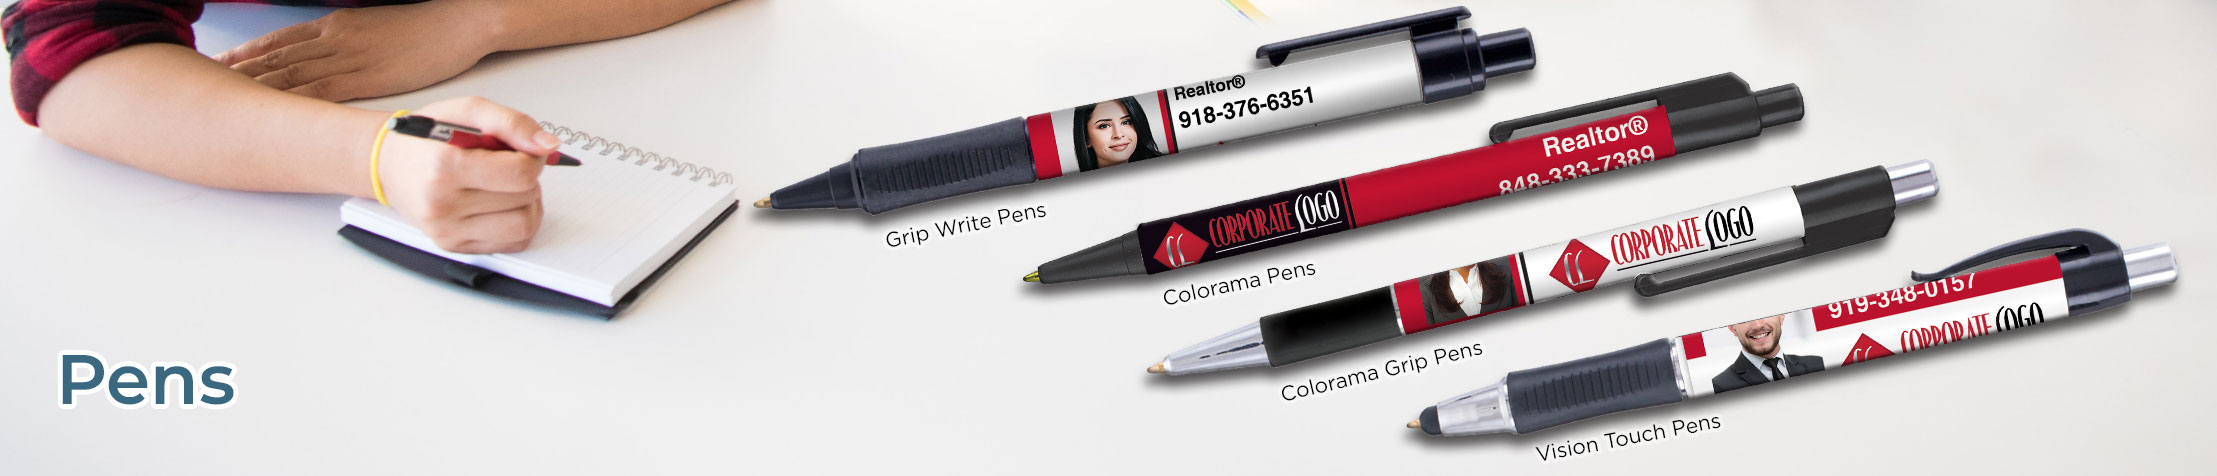 HomeSmart Real Estate Personalized Pens - promotional products: Grip Write Pens, Colorama Pens, Vision Touch Pens, and Colorama Grip Pens | BestPrintBuy.com